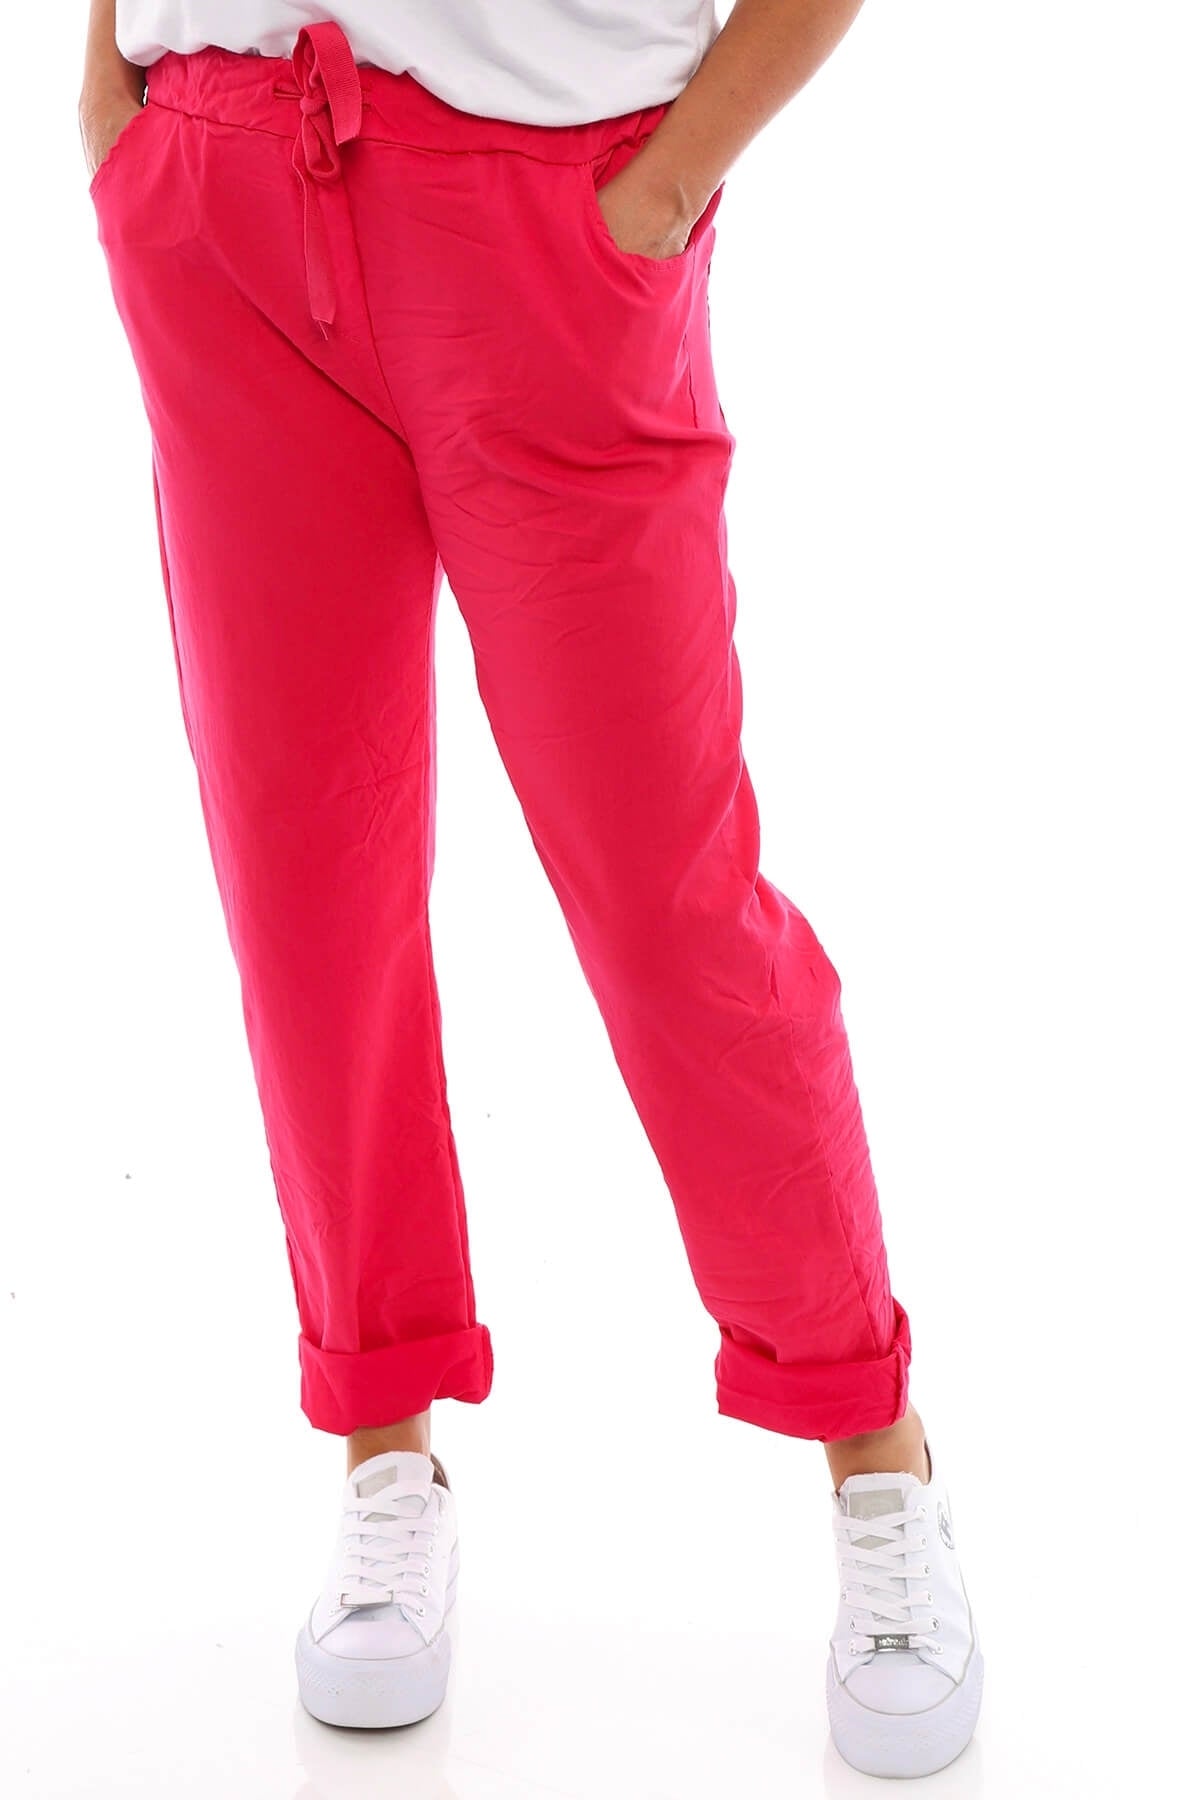 Yarwell Joggers Hot Pink